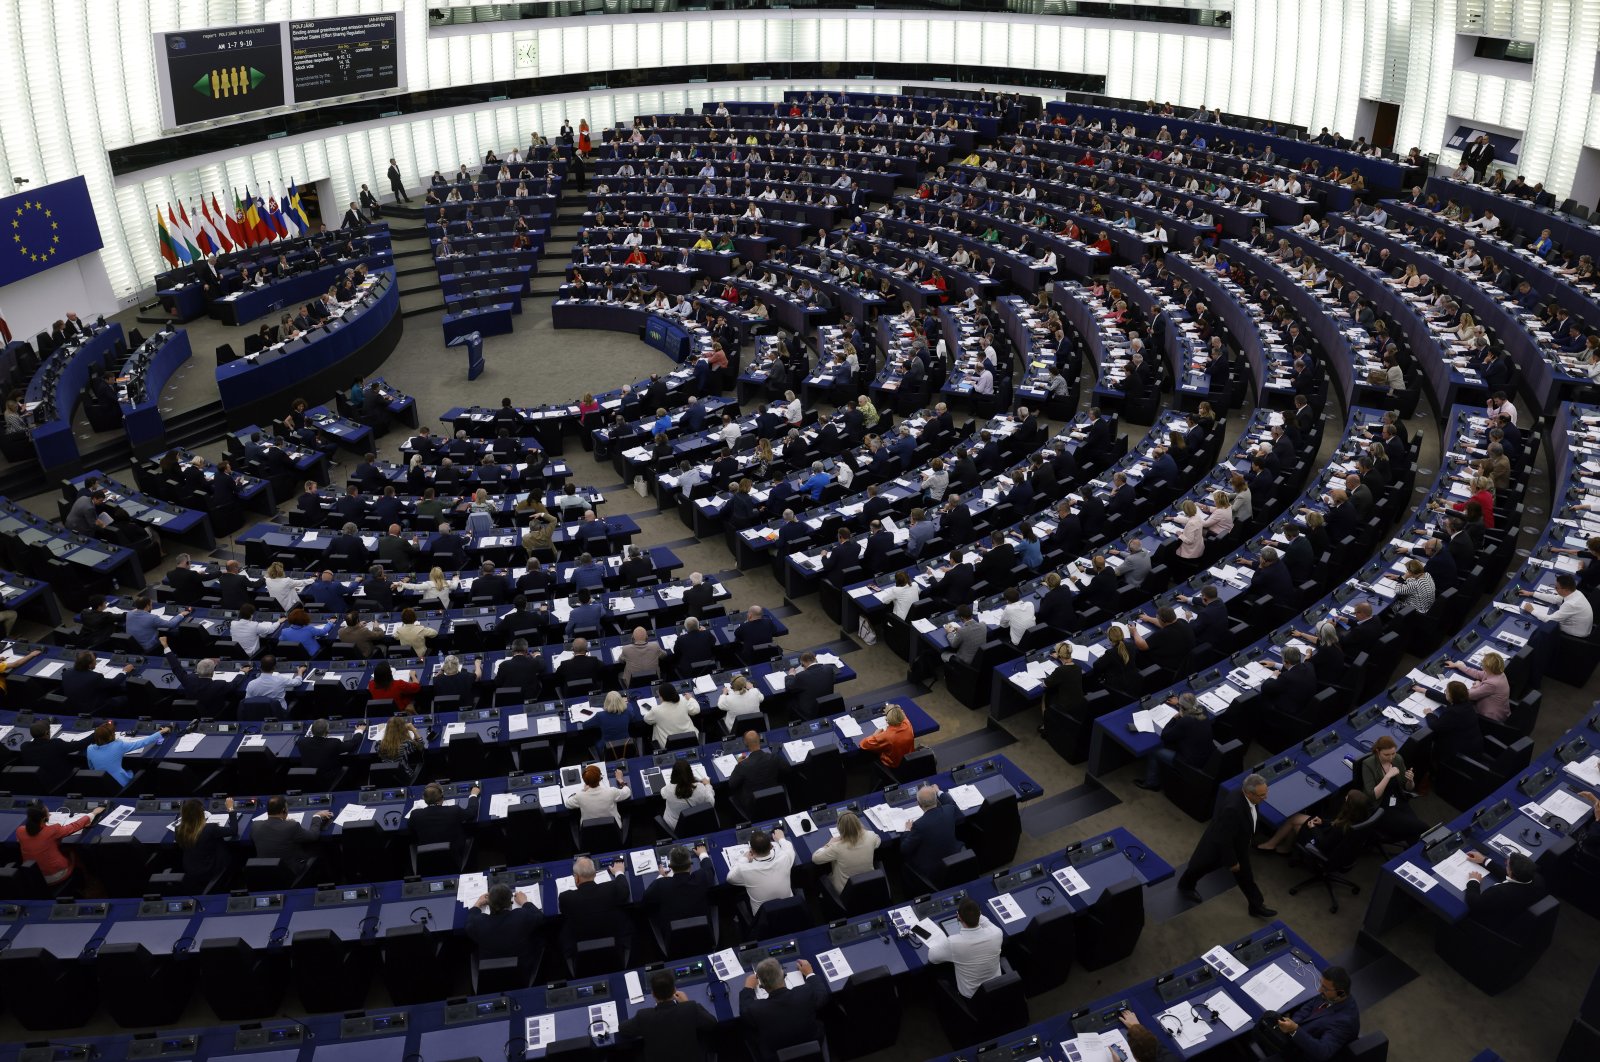 Members of Parliament vote on plans to reduce carbon emissions, at the European Parliament, in Strasbourg, eastern France, June 8, 2022. (AP Photo)